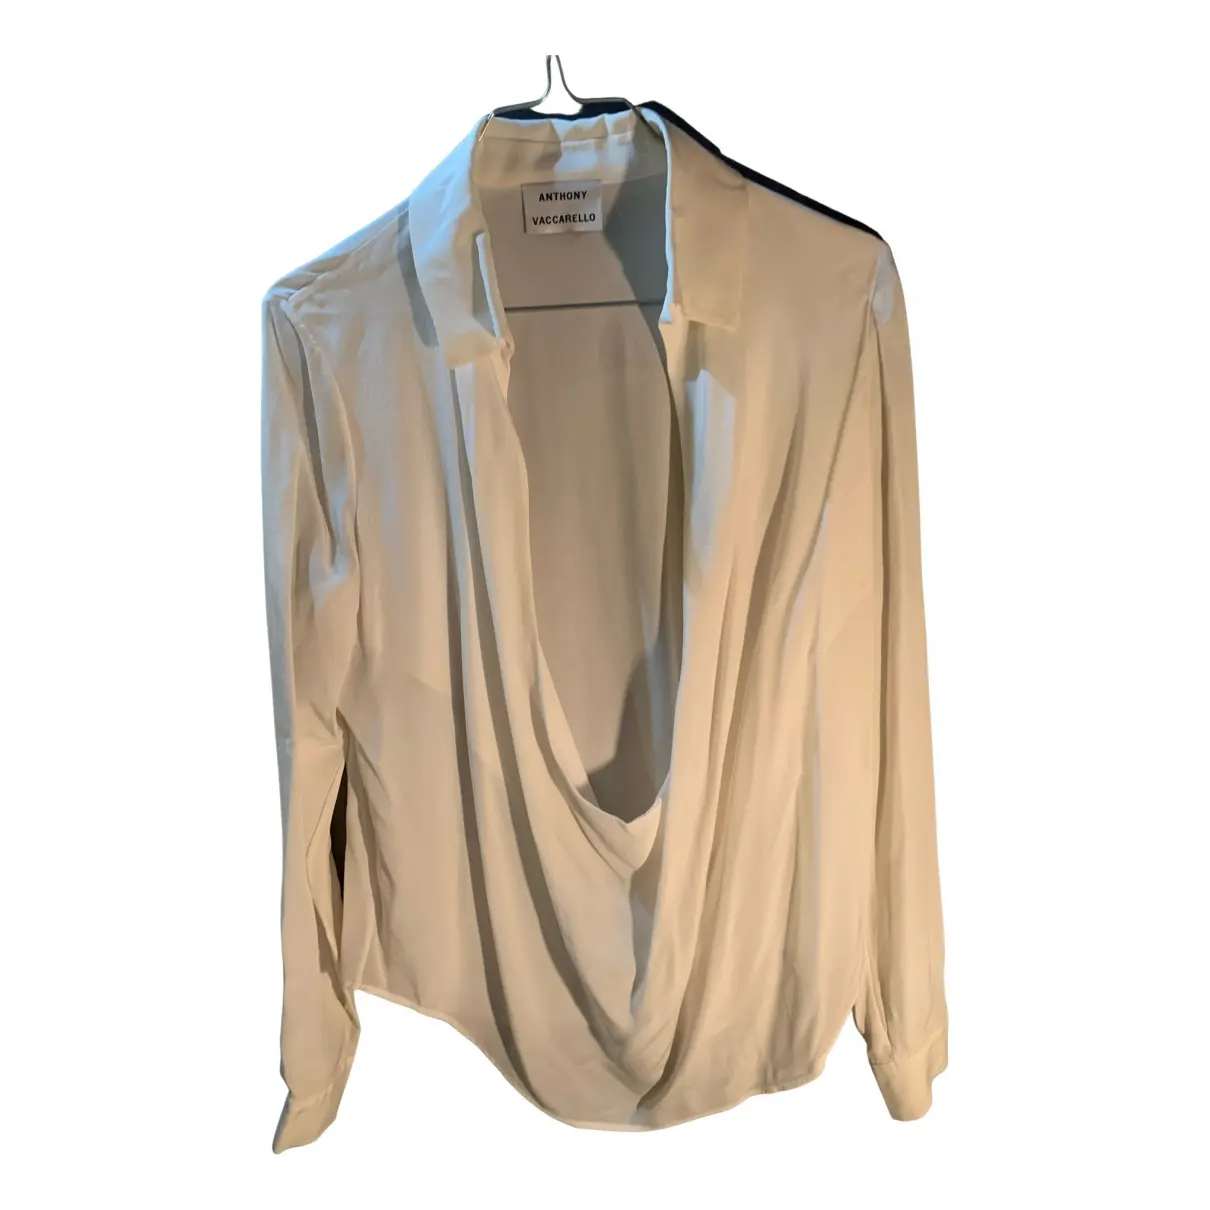 Silk blouse Anthony Vaccarello